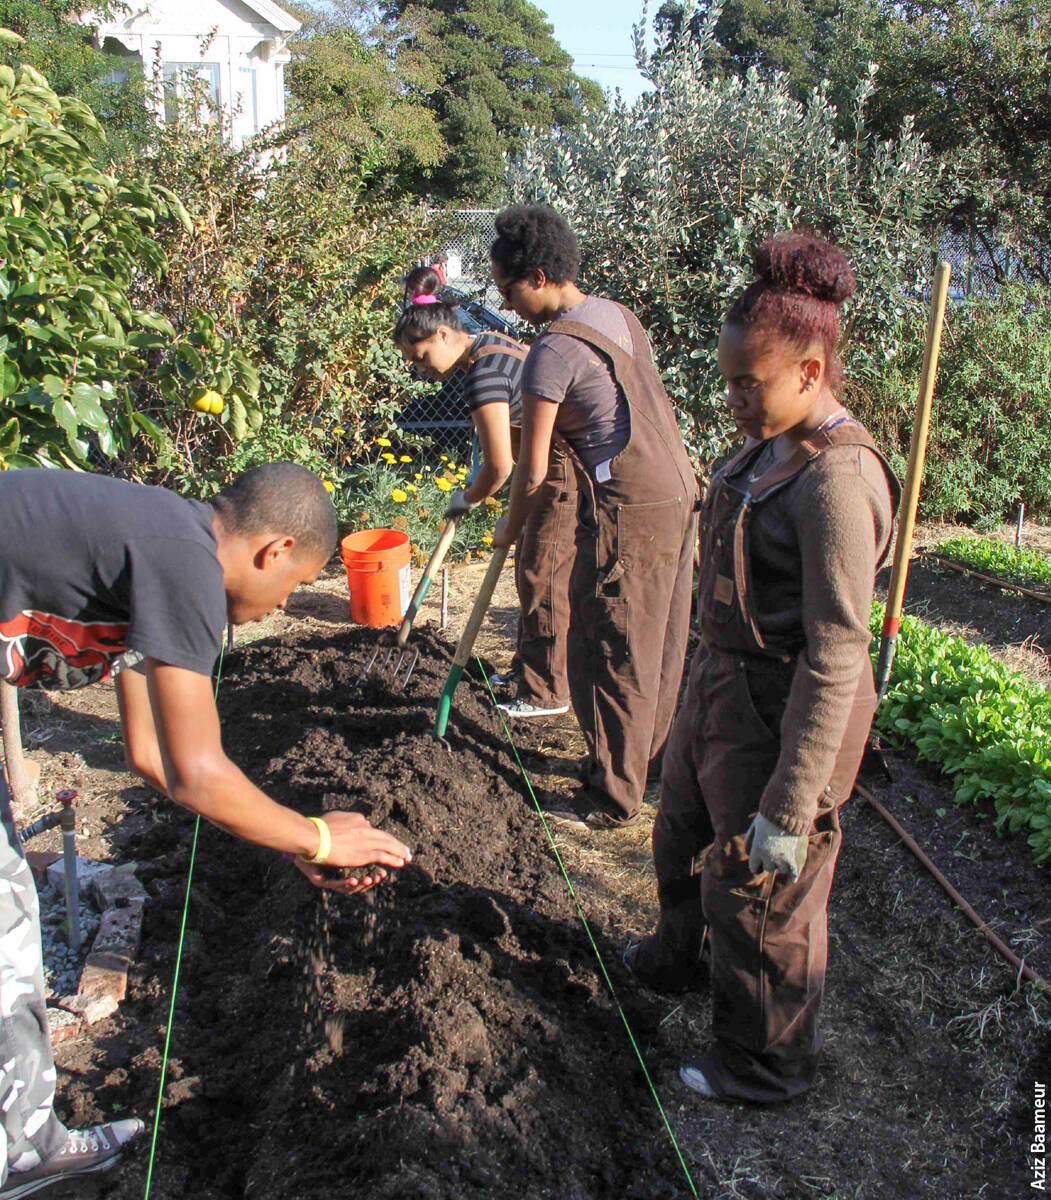 Participants in an urban agriculture project analyzed for this research get their hands dirty at WOW Farm in Richmond, Contra Costa County. The project's policy outcomes included governmental support for local urban agriculture ordinances.